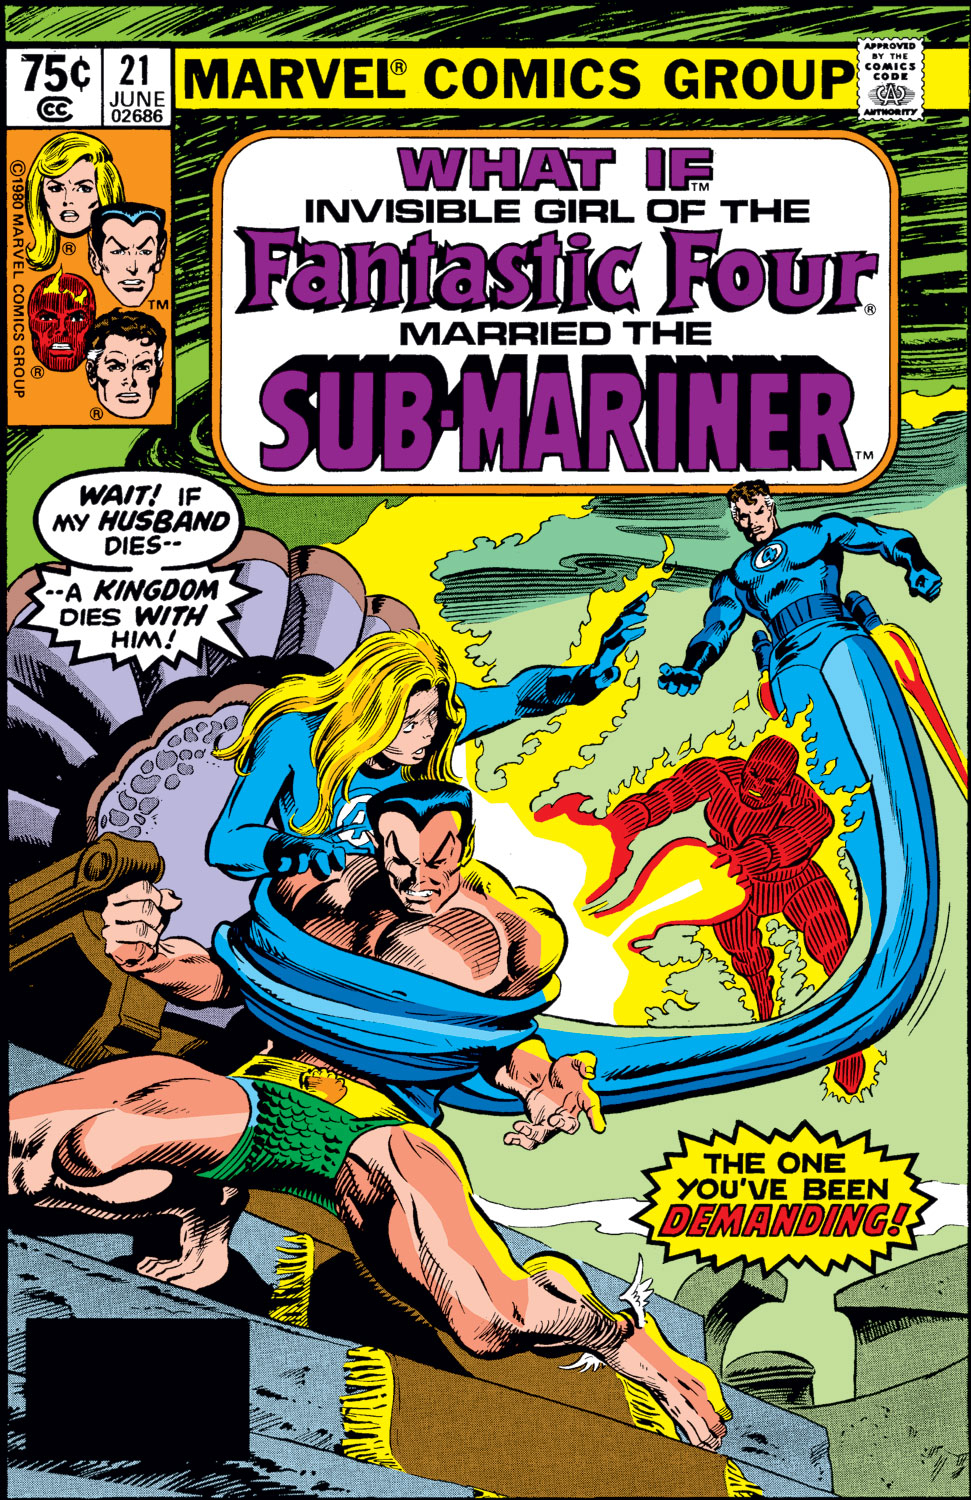 Read online What If? (1977) comic -  Issue #21 - Invisible Girl of the Fantastic Four married the Sub-Mariner - 1